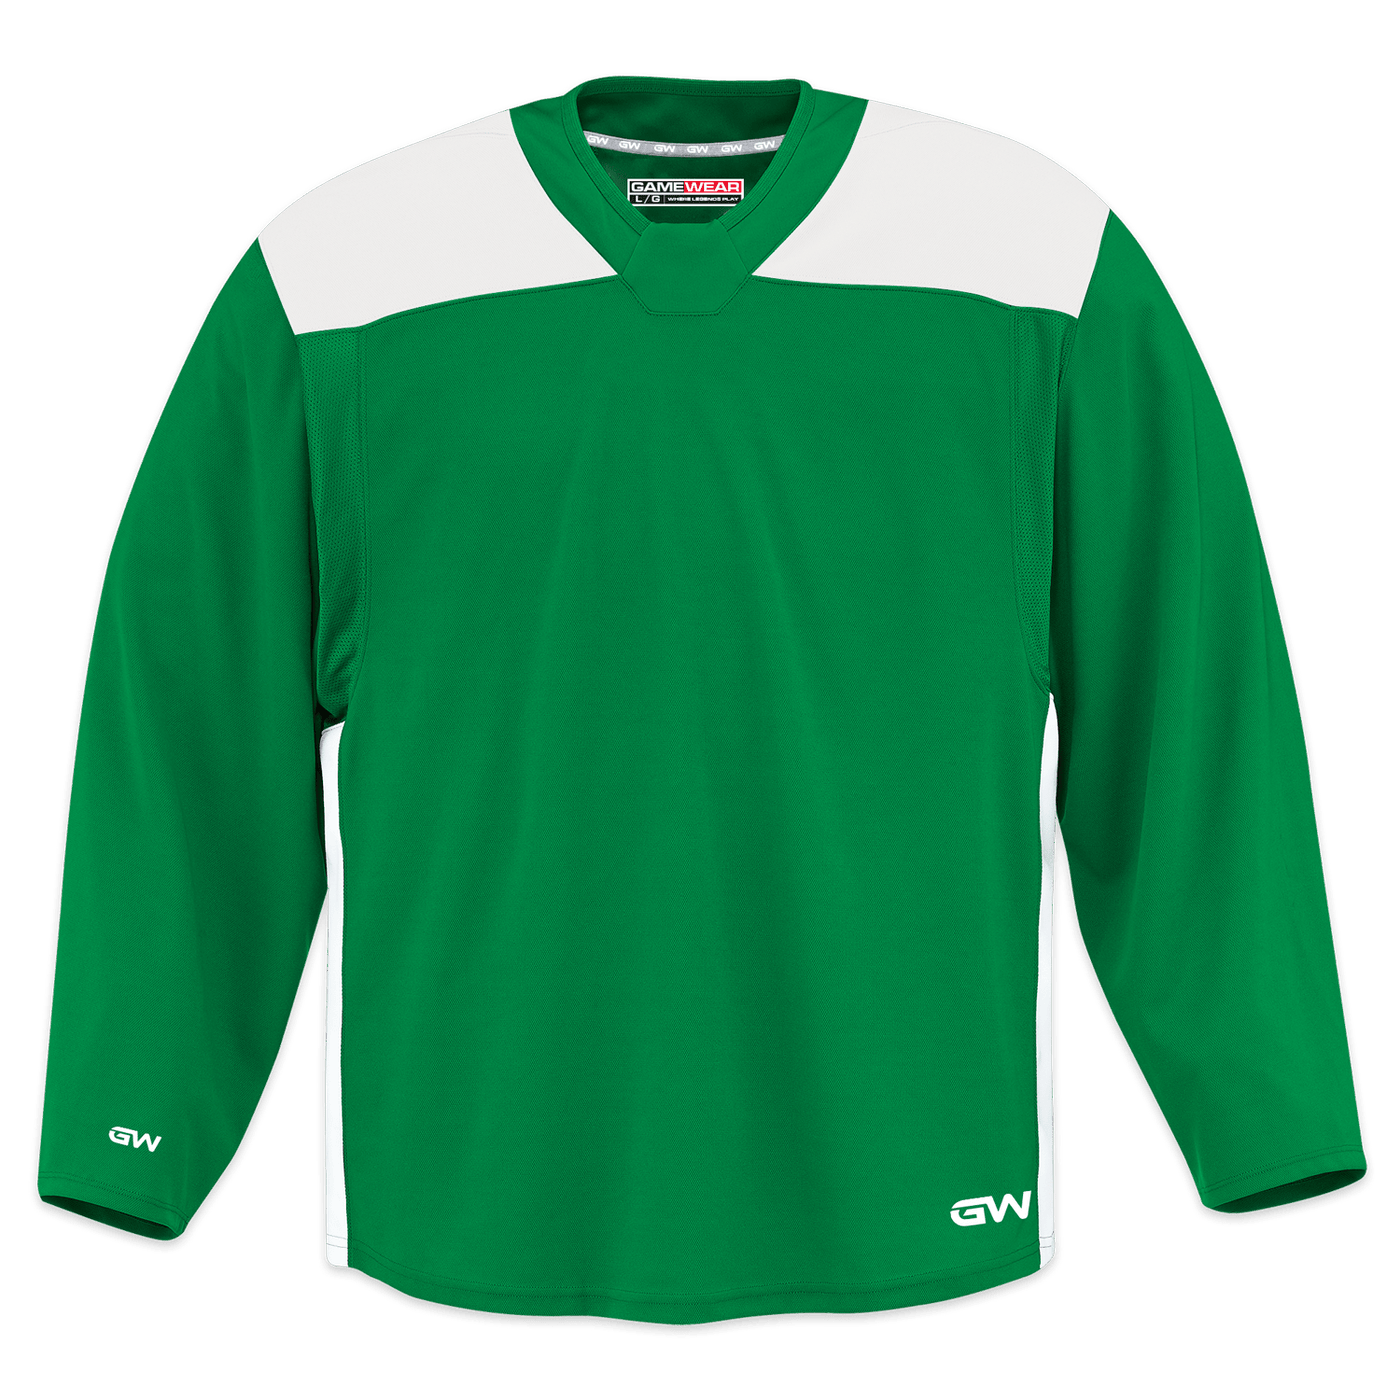 GameWear GW6500 ProLite Series Junior Hockey Practice Jersey - Kelly Green / White - The Hockey Shop Source For Sports